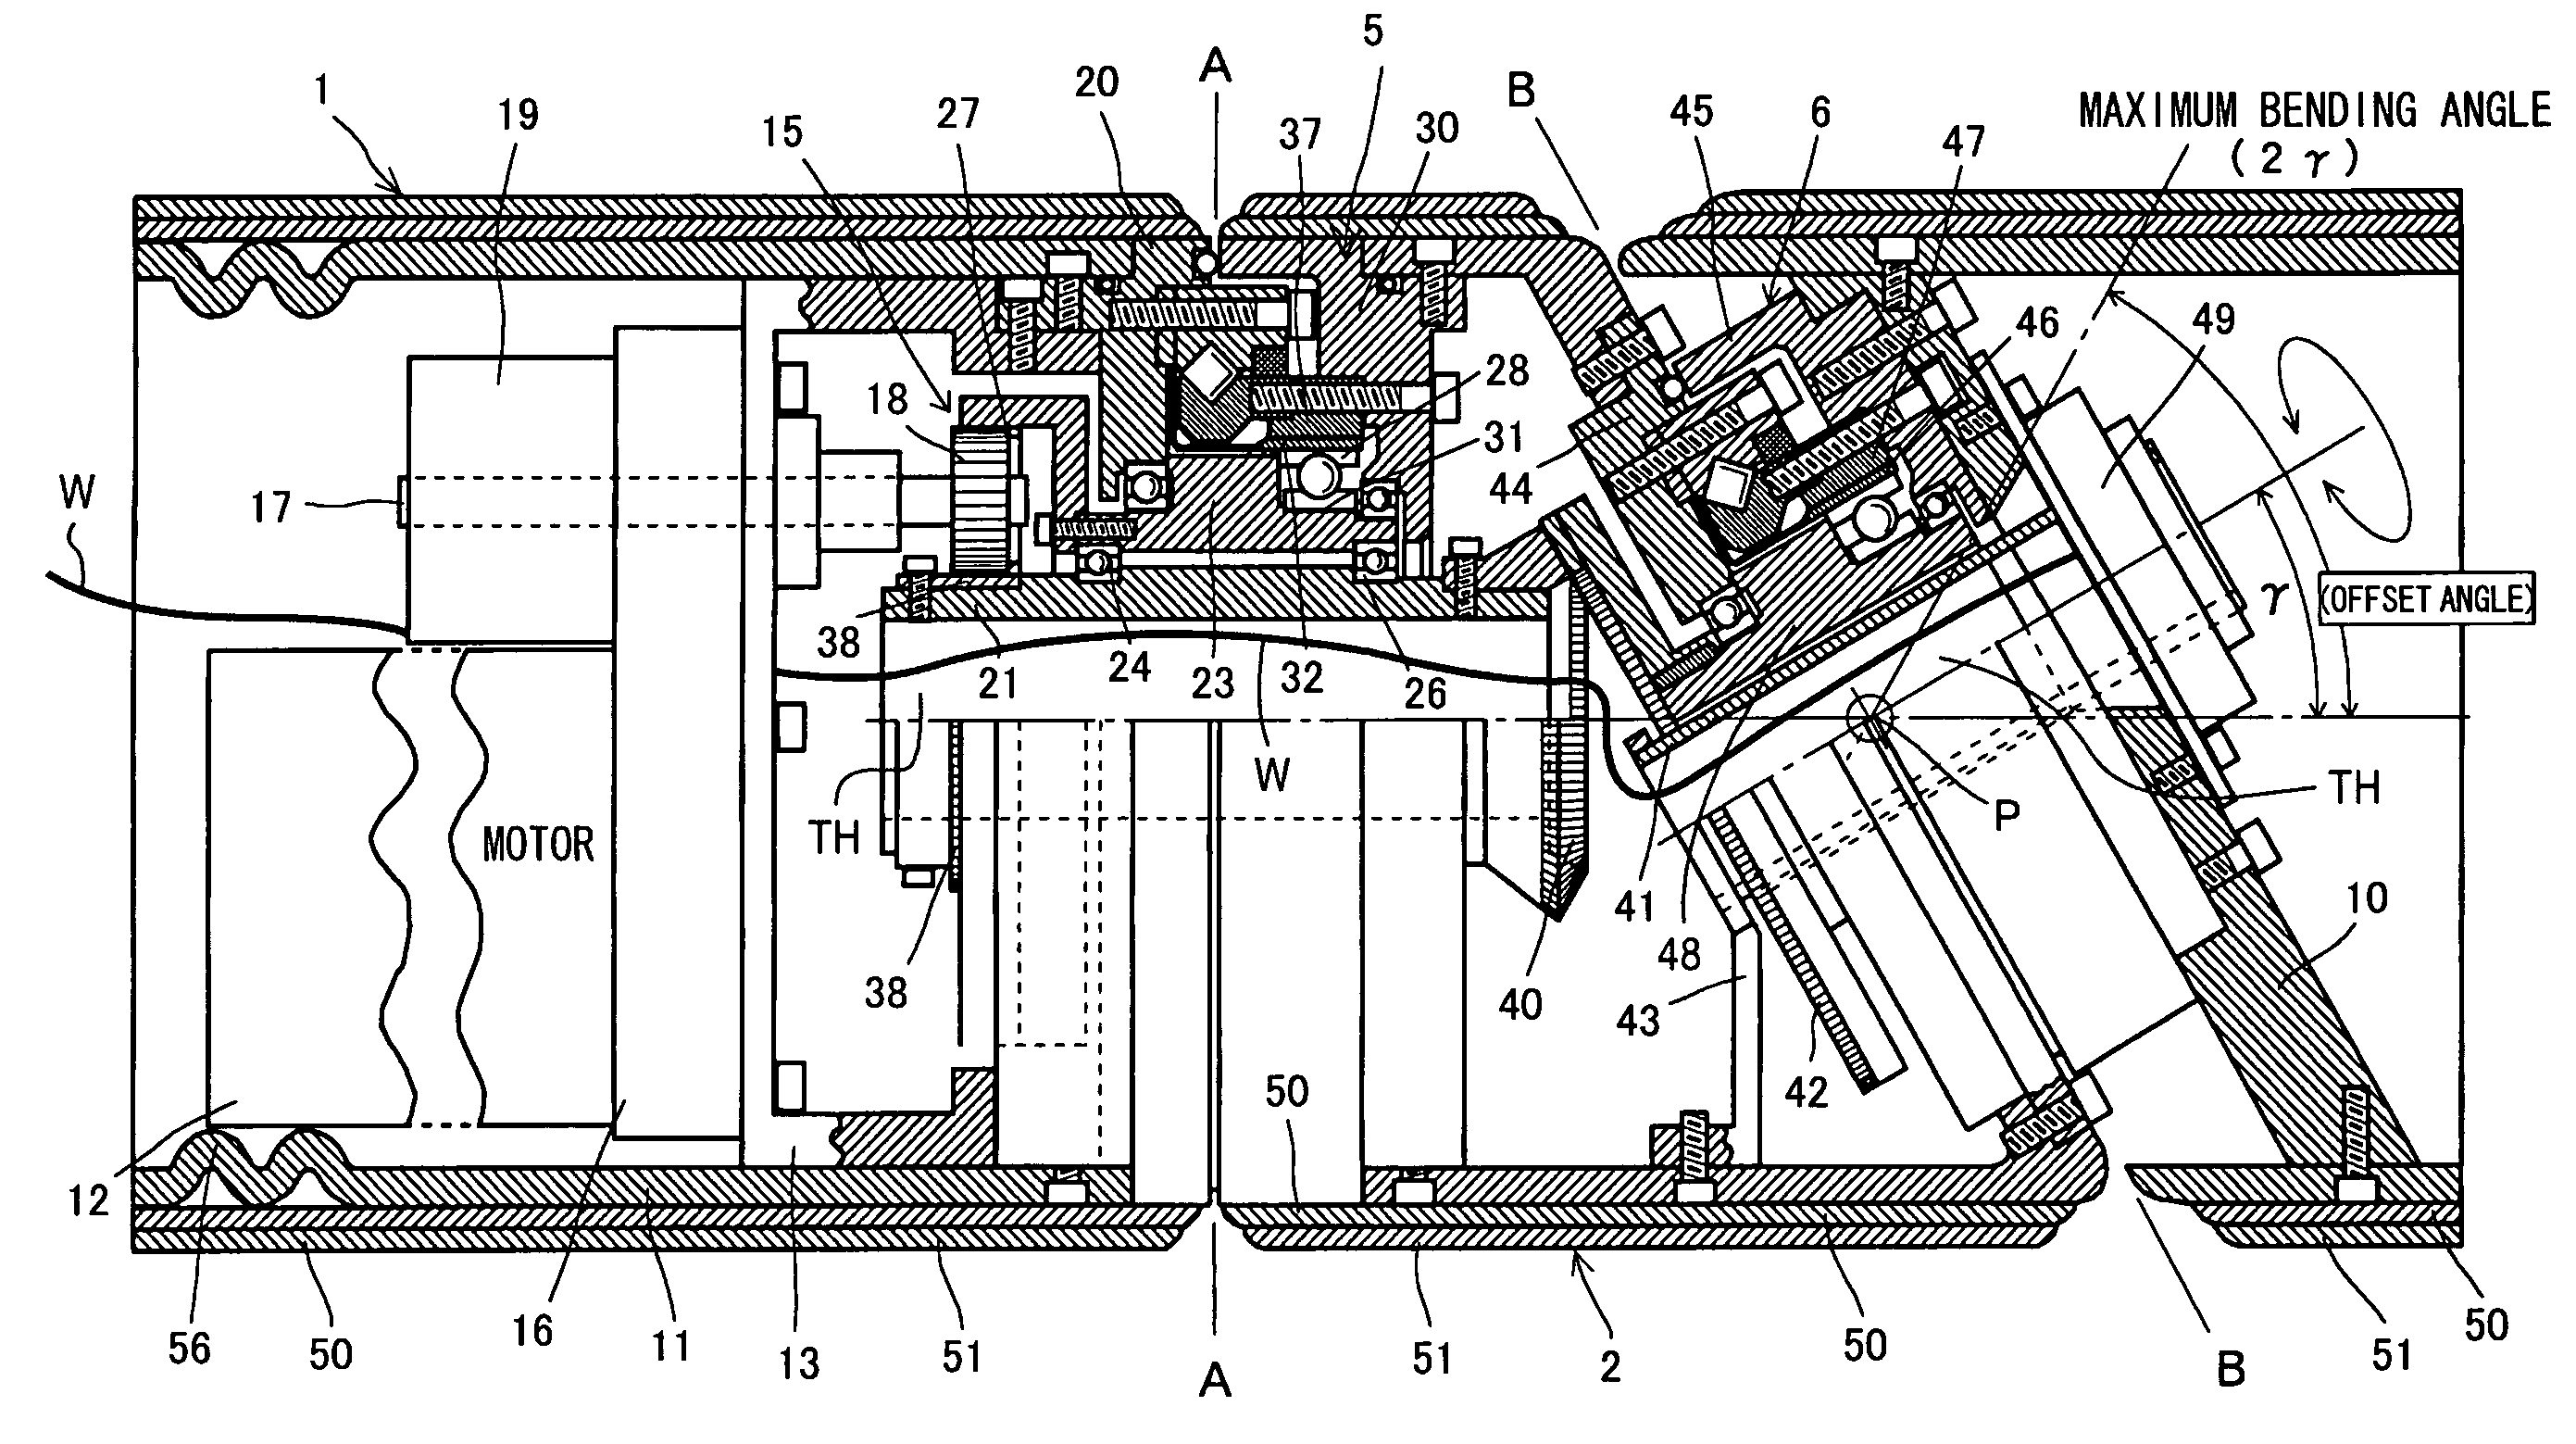 Offset rotary joint unit equipped with rotation correction mechanism